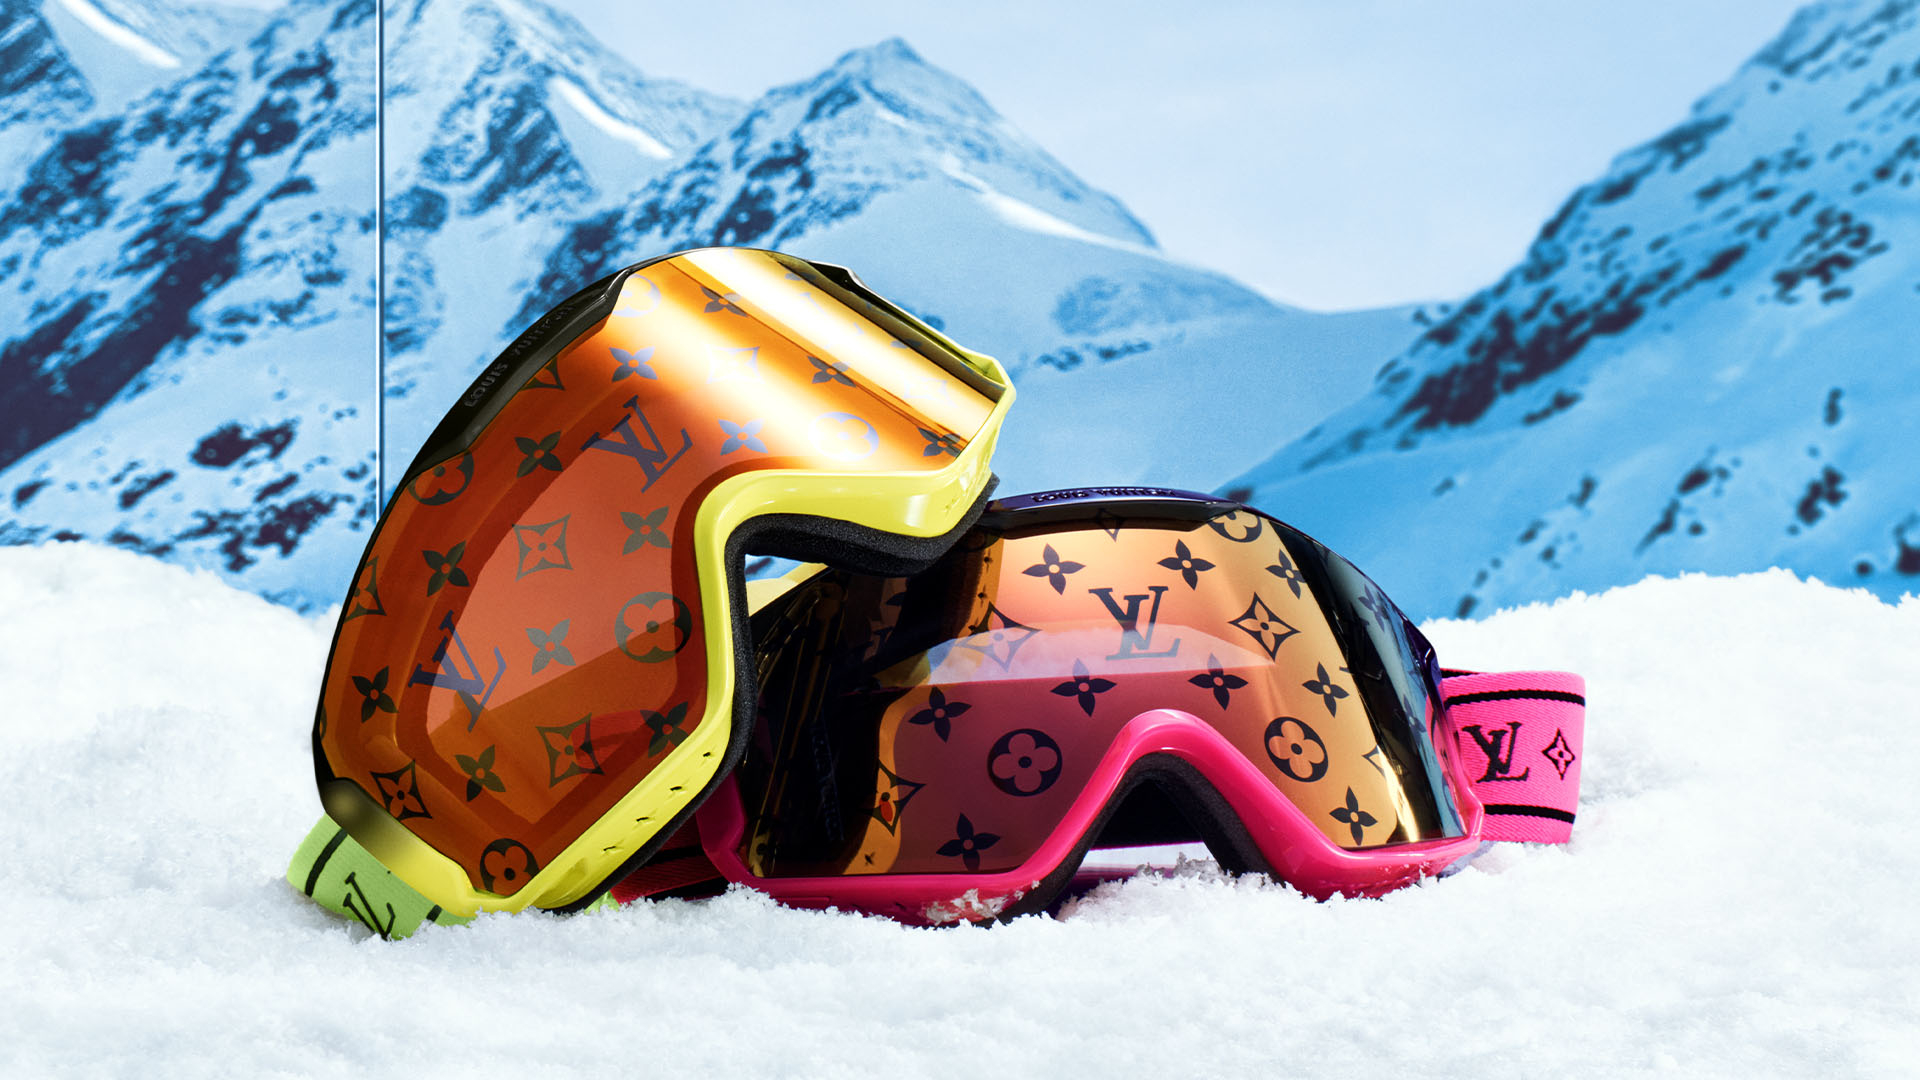 Louis Vuitton's Winter 2023 Ski Collection: From Slopes to Après